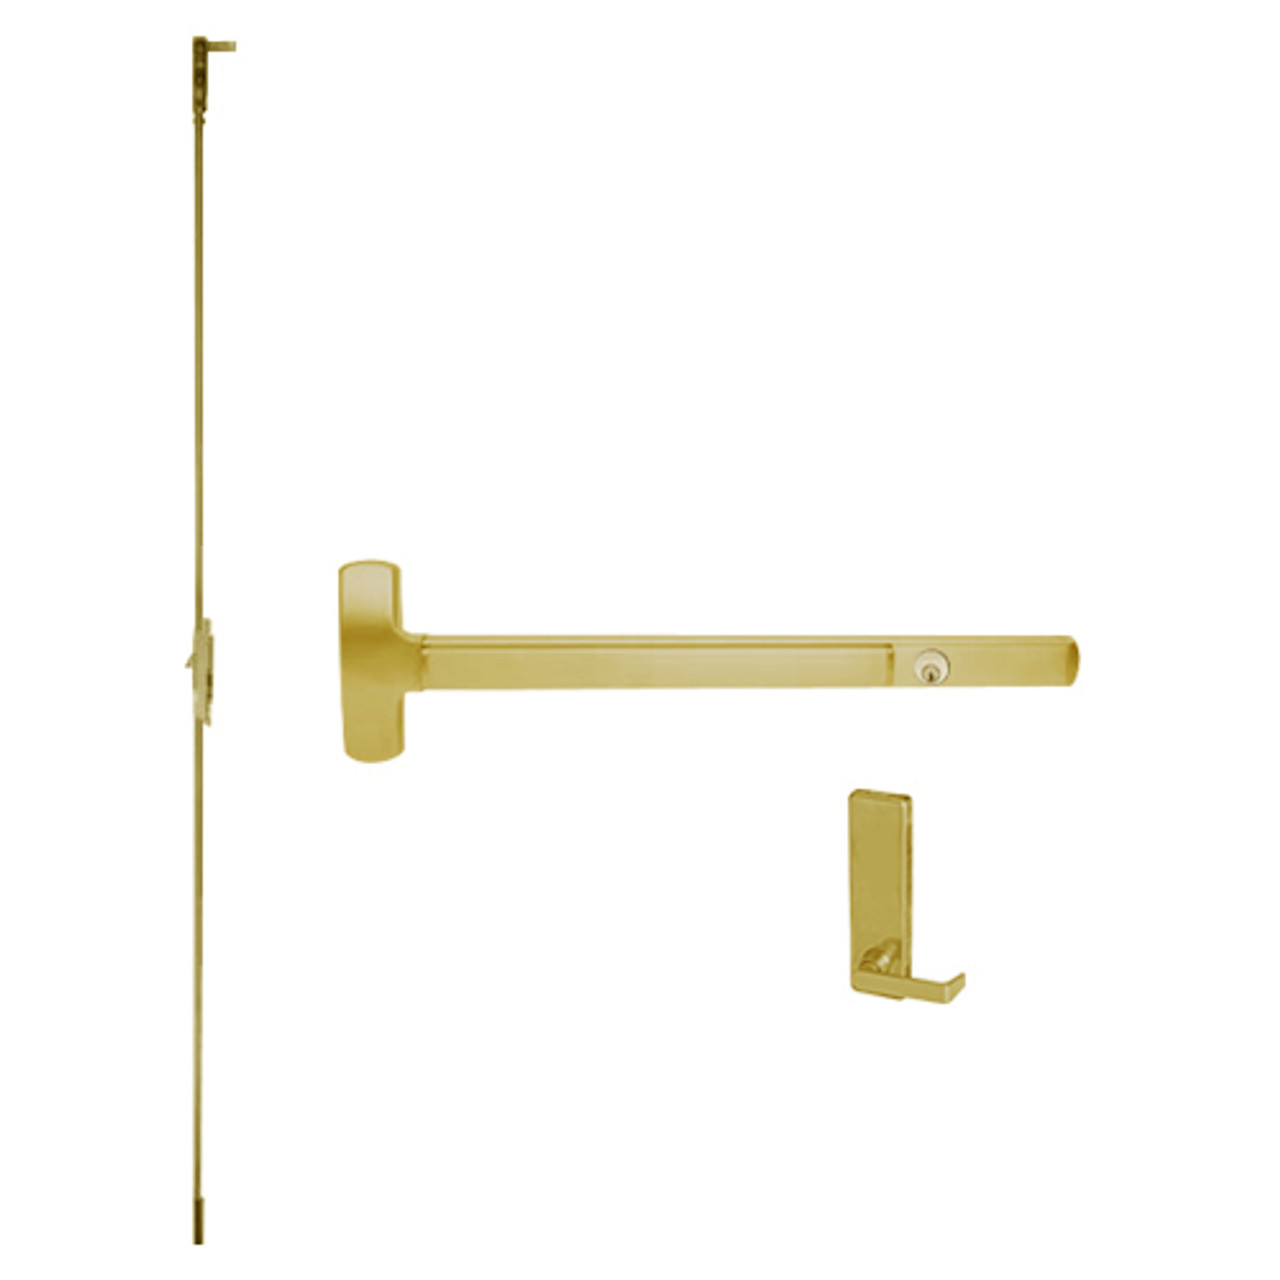 CD25-C-L-BE-DANE-US3-3-RHR Falcon Exit Device in Polished Brass